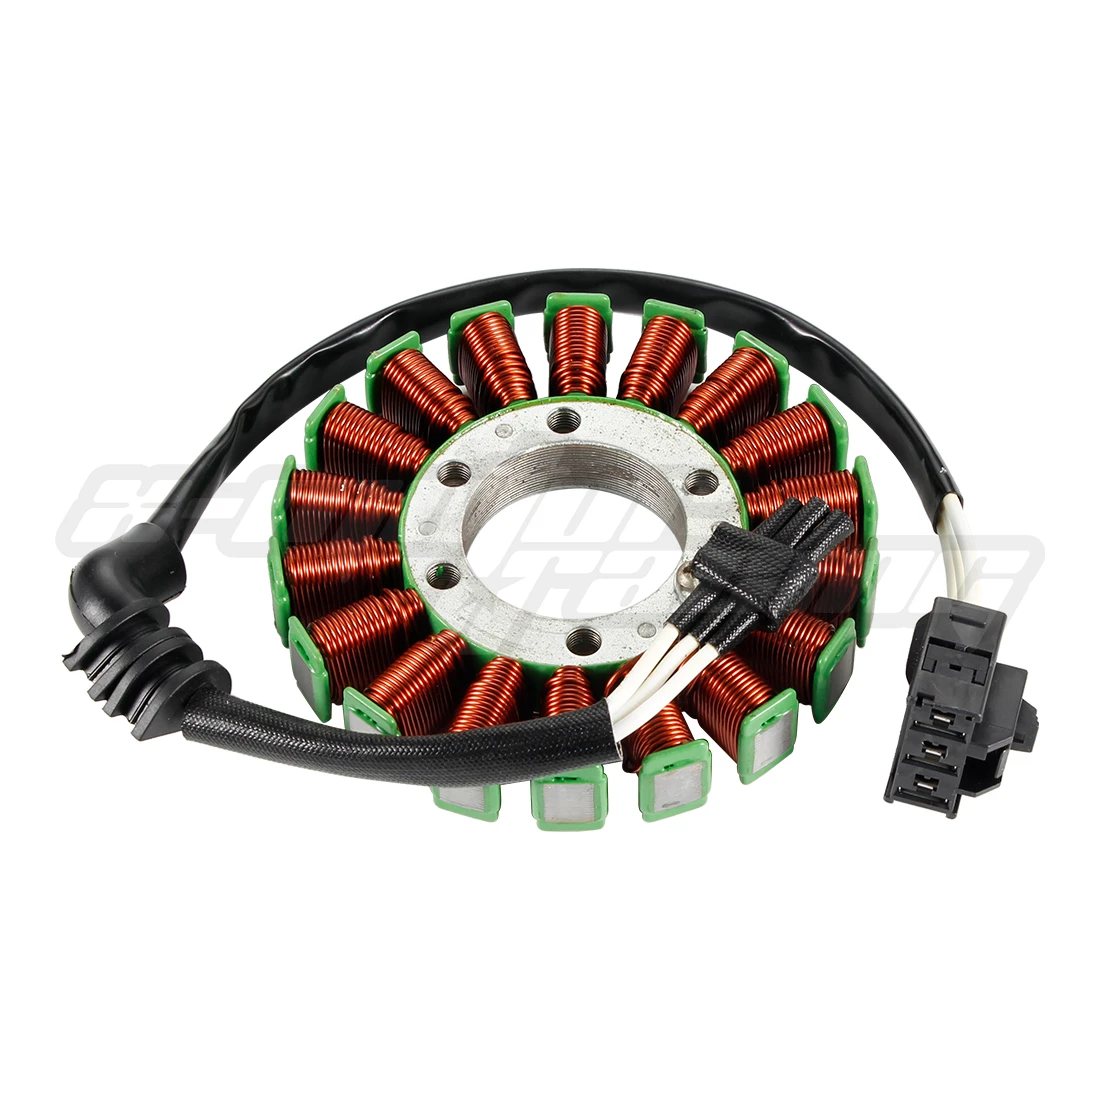 Enlarge Motorcycle Generator Magneto Stator Coil For Yamaha YZF R6 2006-2016 2C0-81410-00-00 2C0-81410-01-00